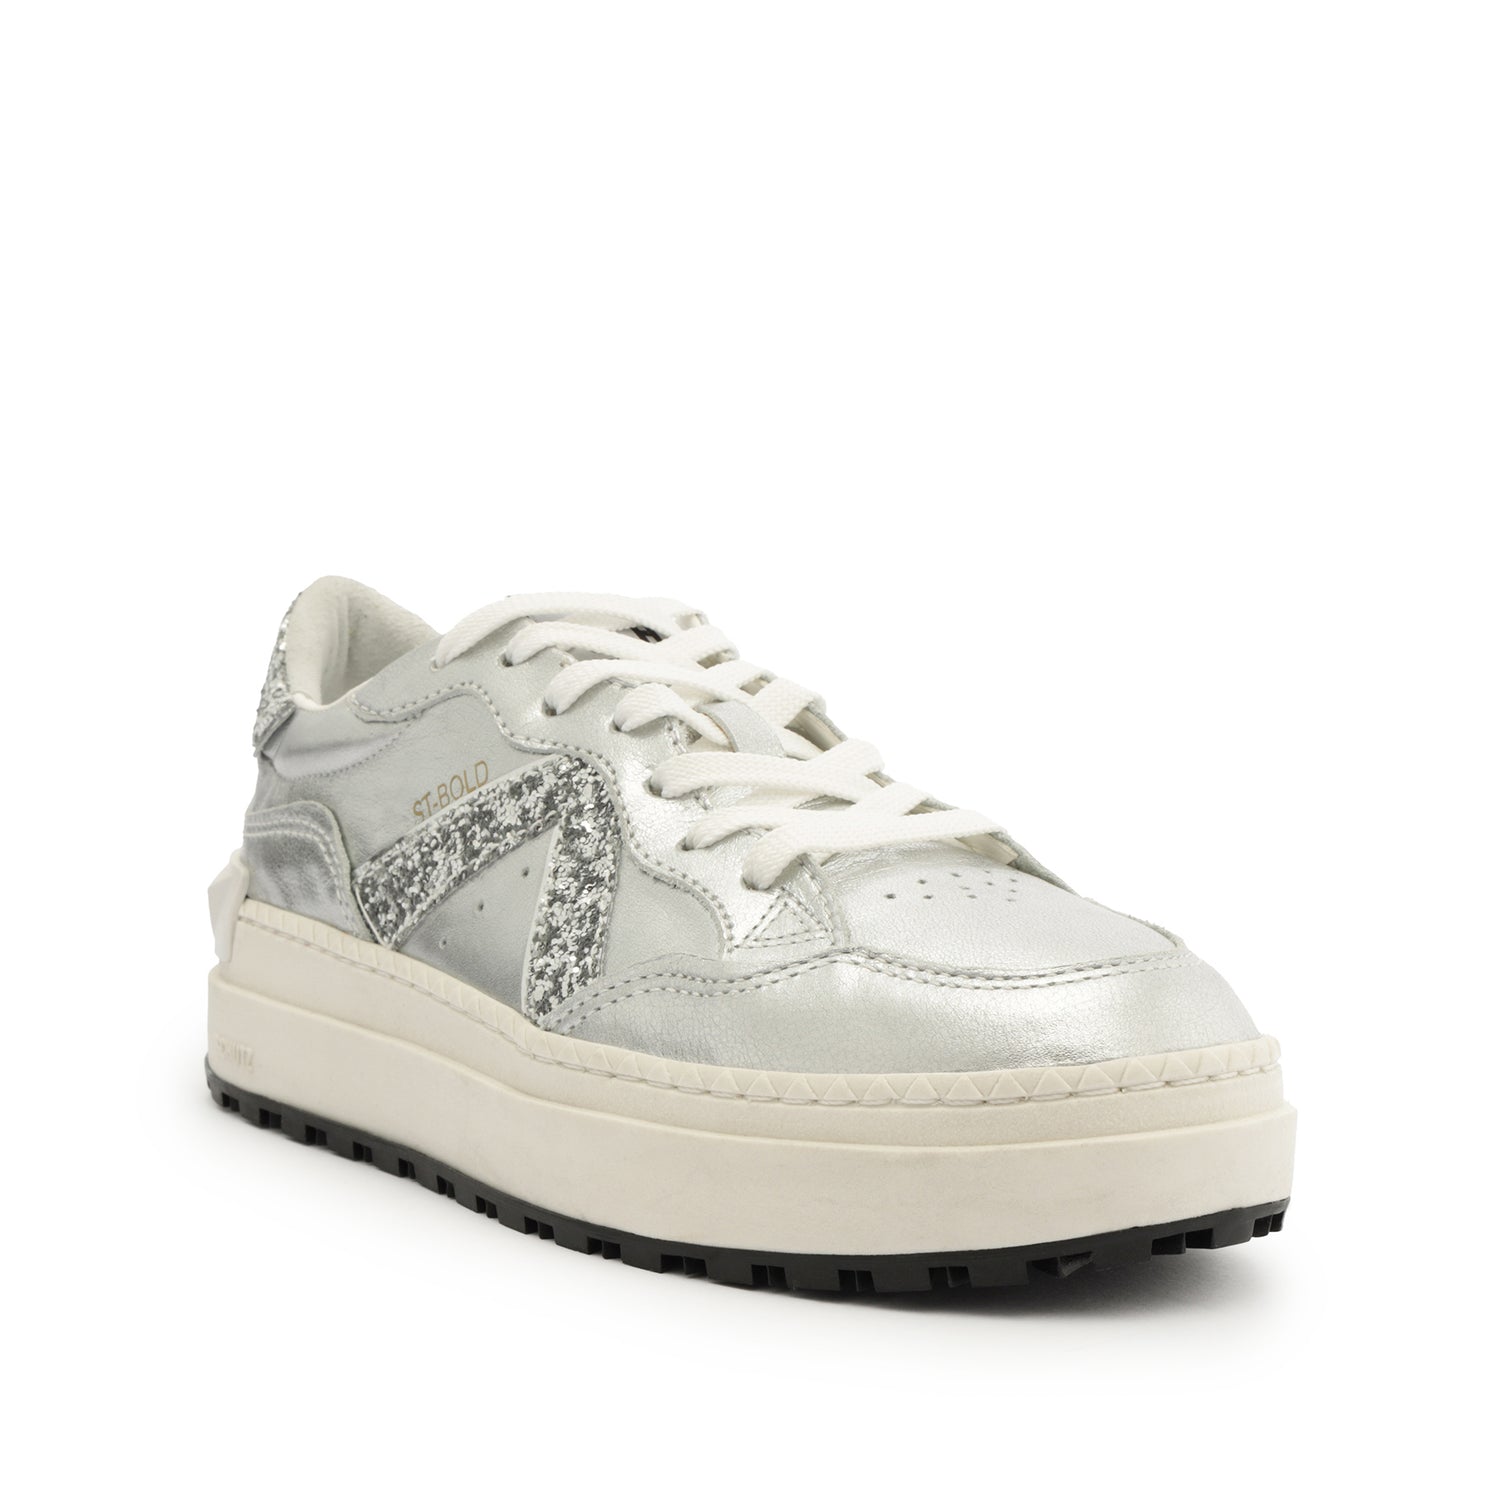 ST-BOLD Leather Sneaker Sneakers CO    - Schutz Shoes